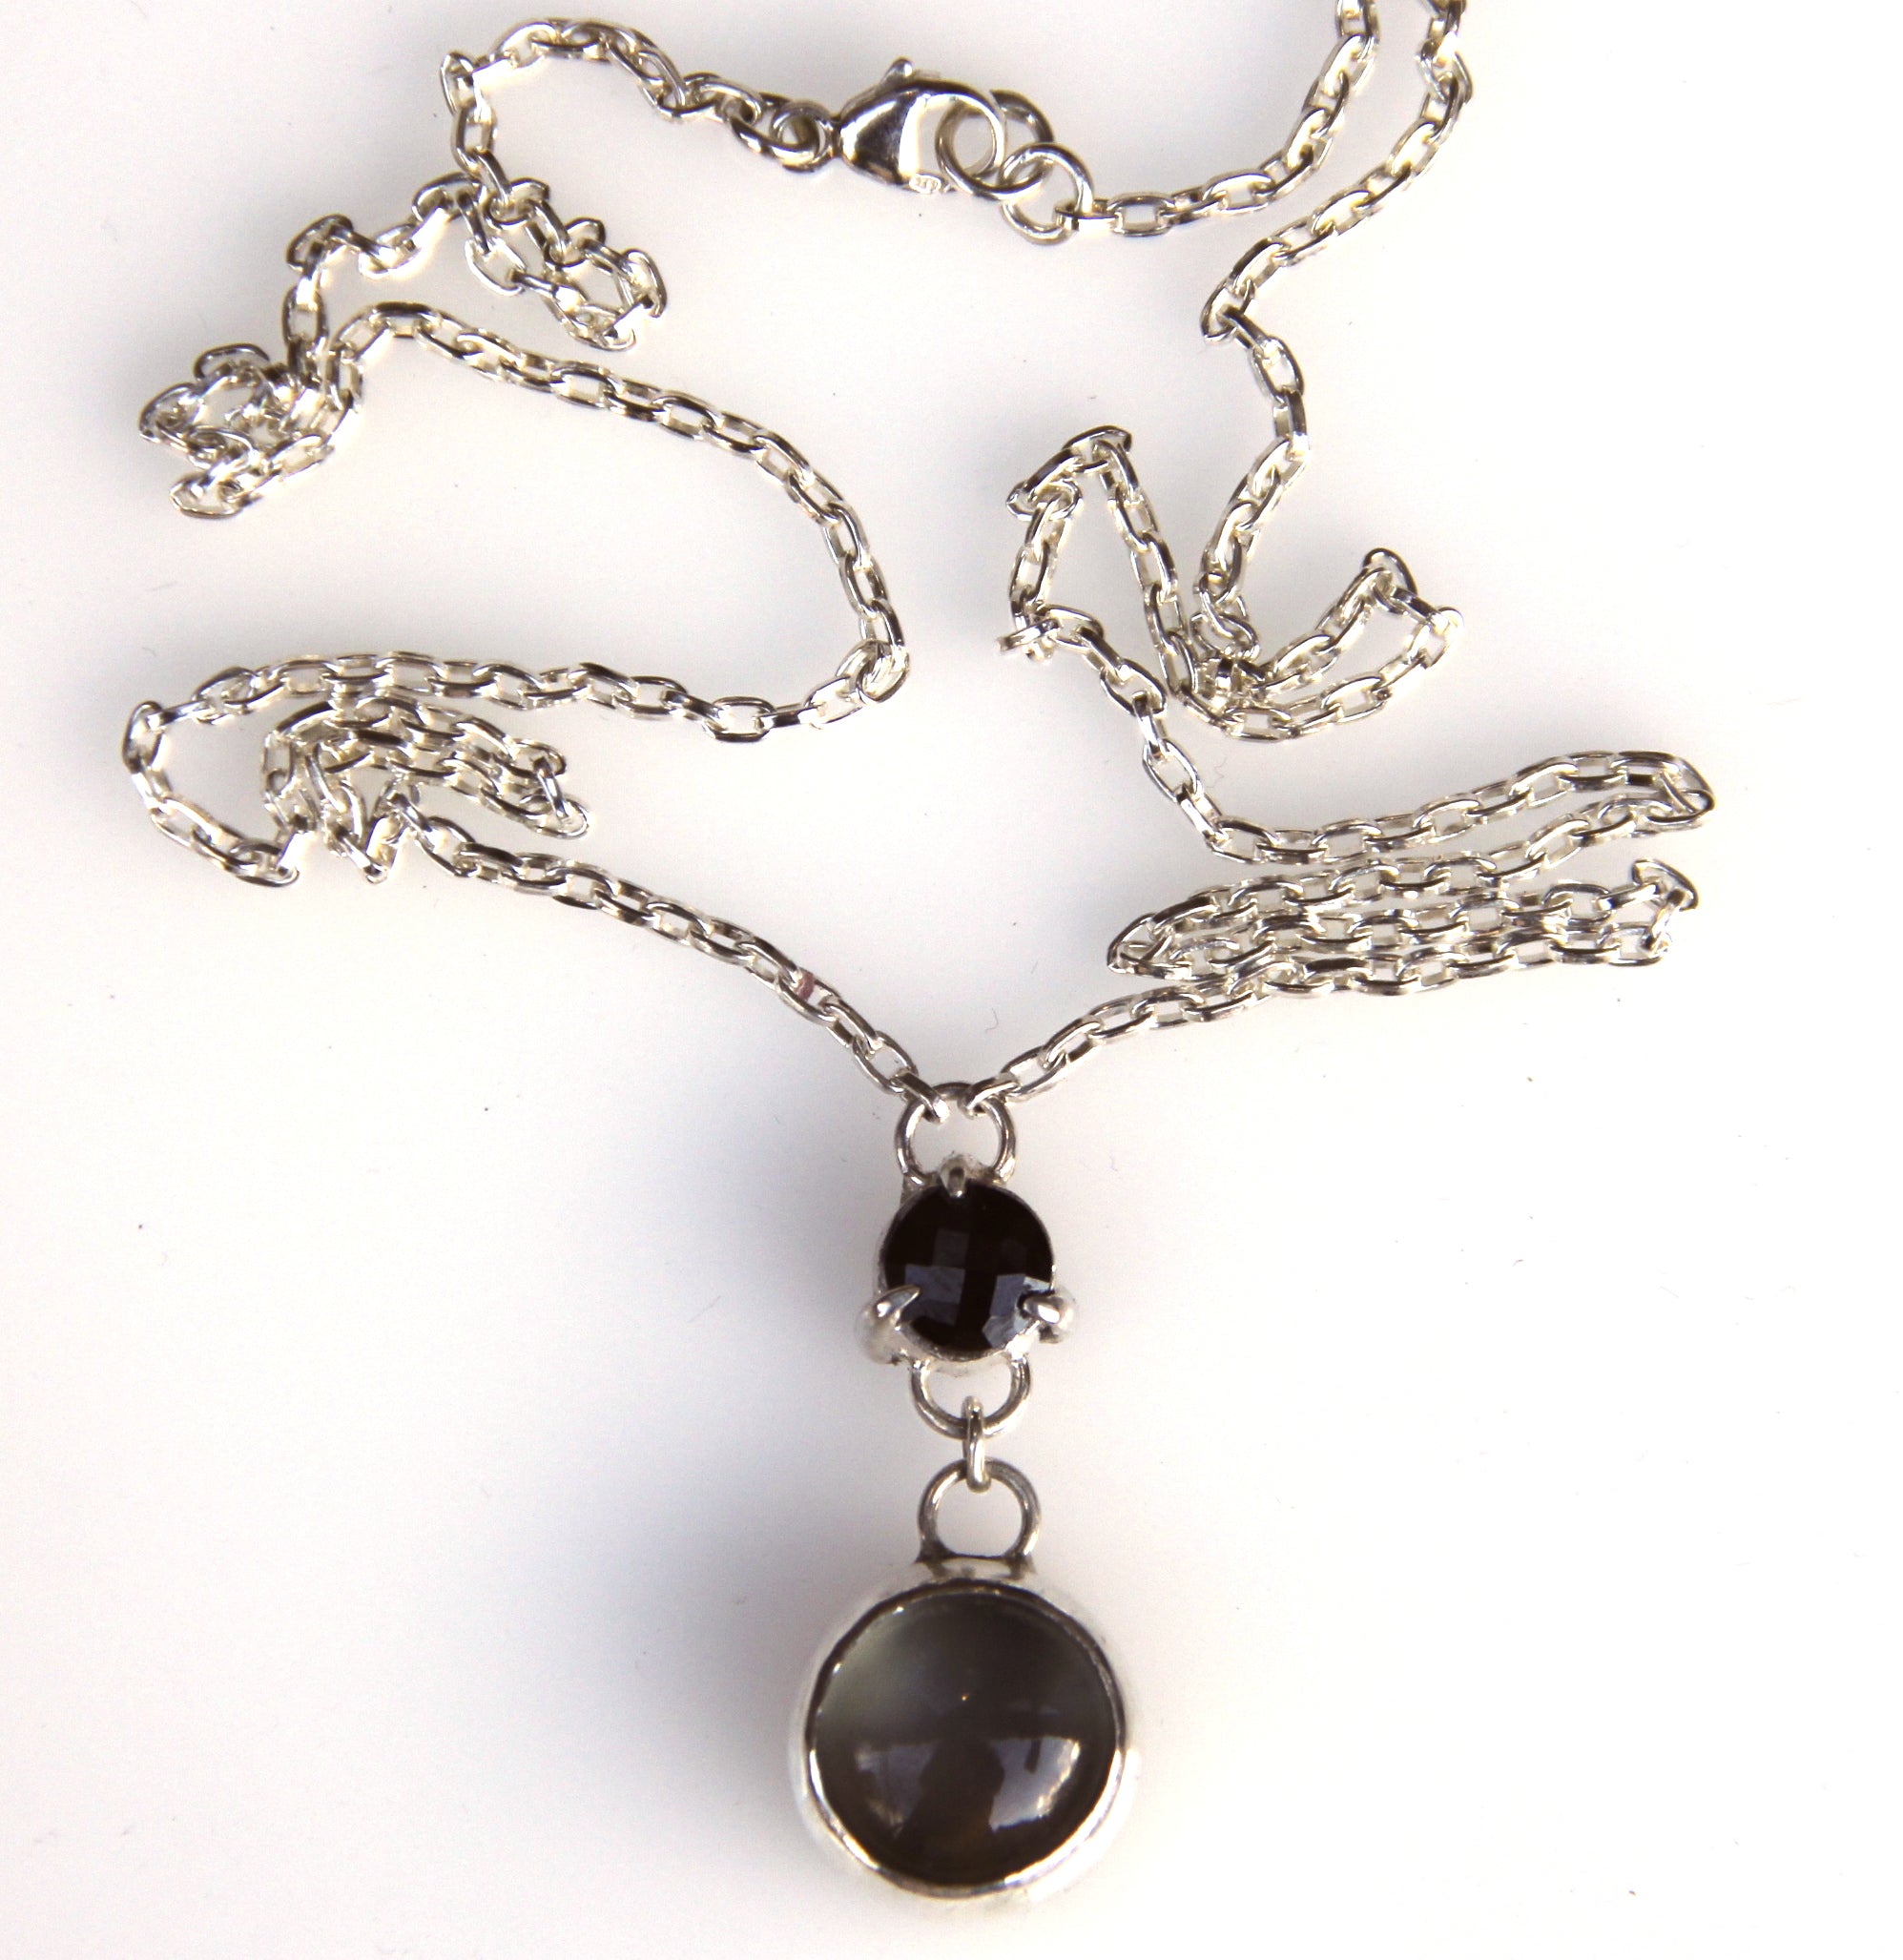 Moonstone and Black Spinel Necklace